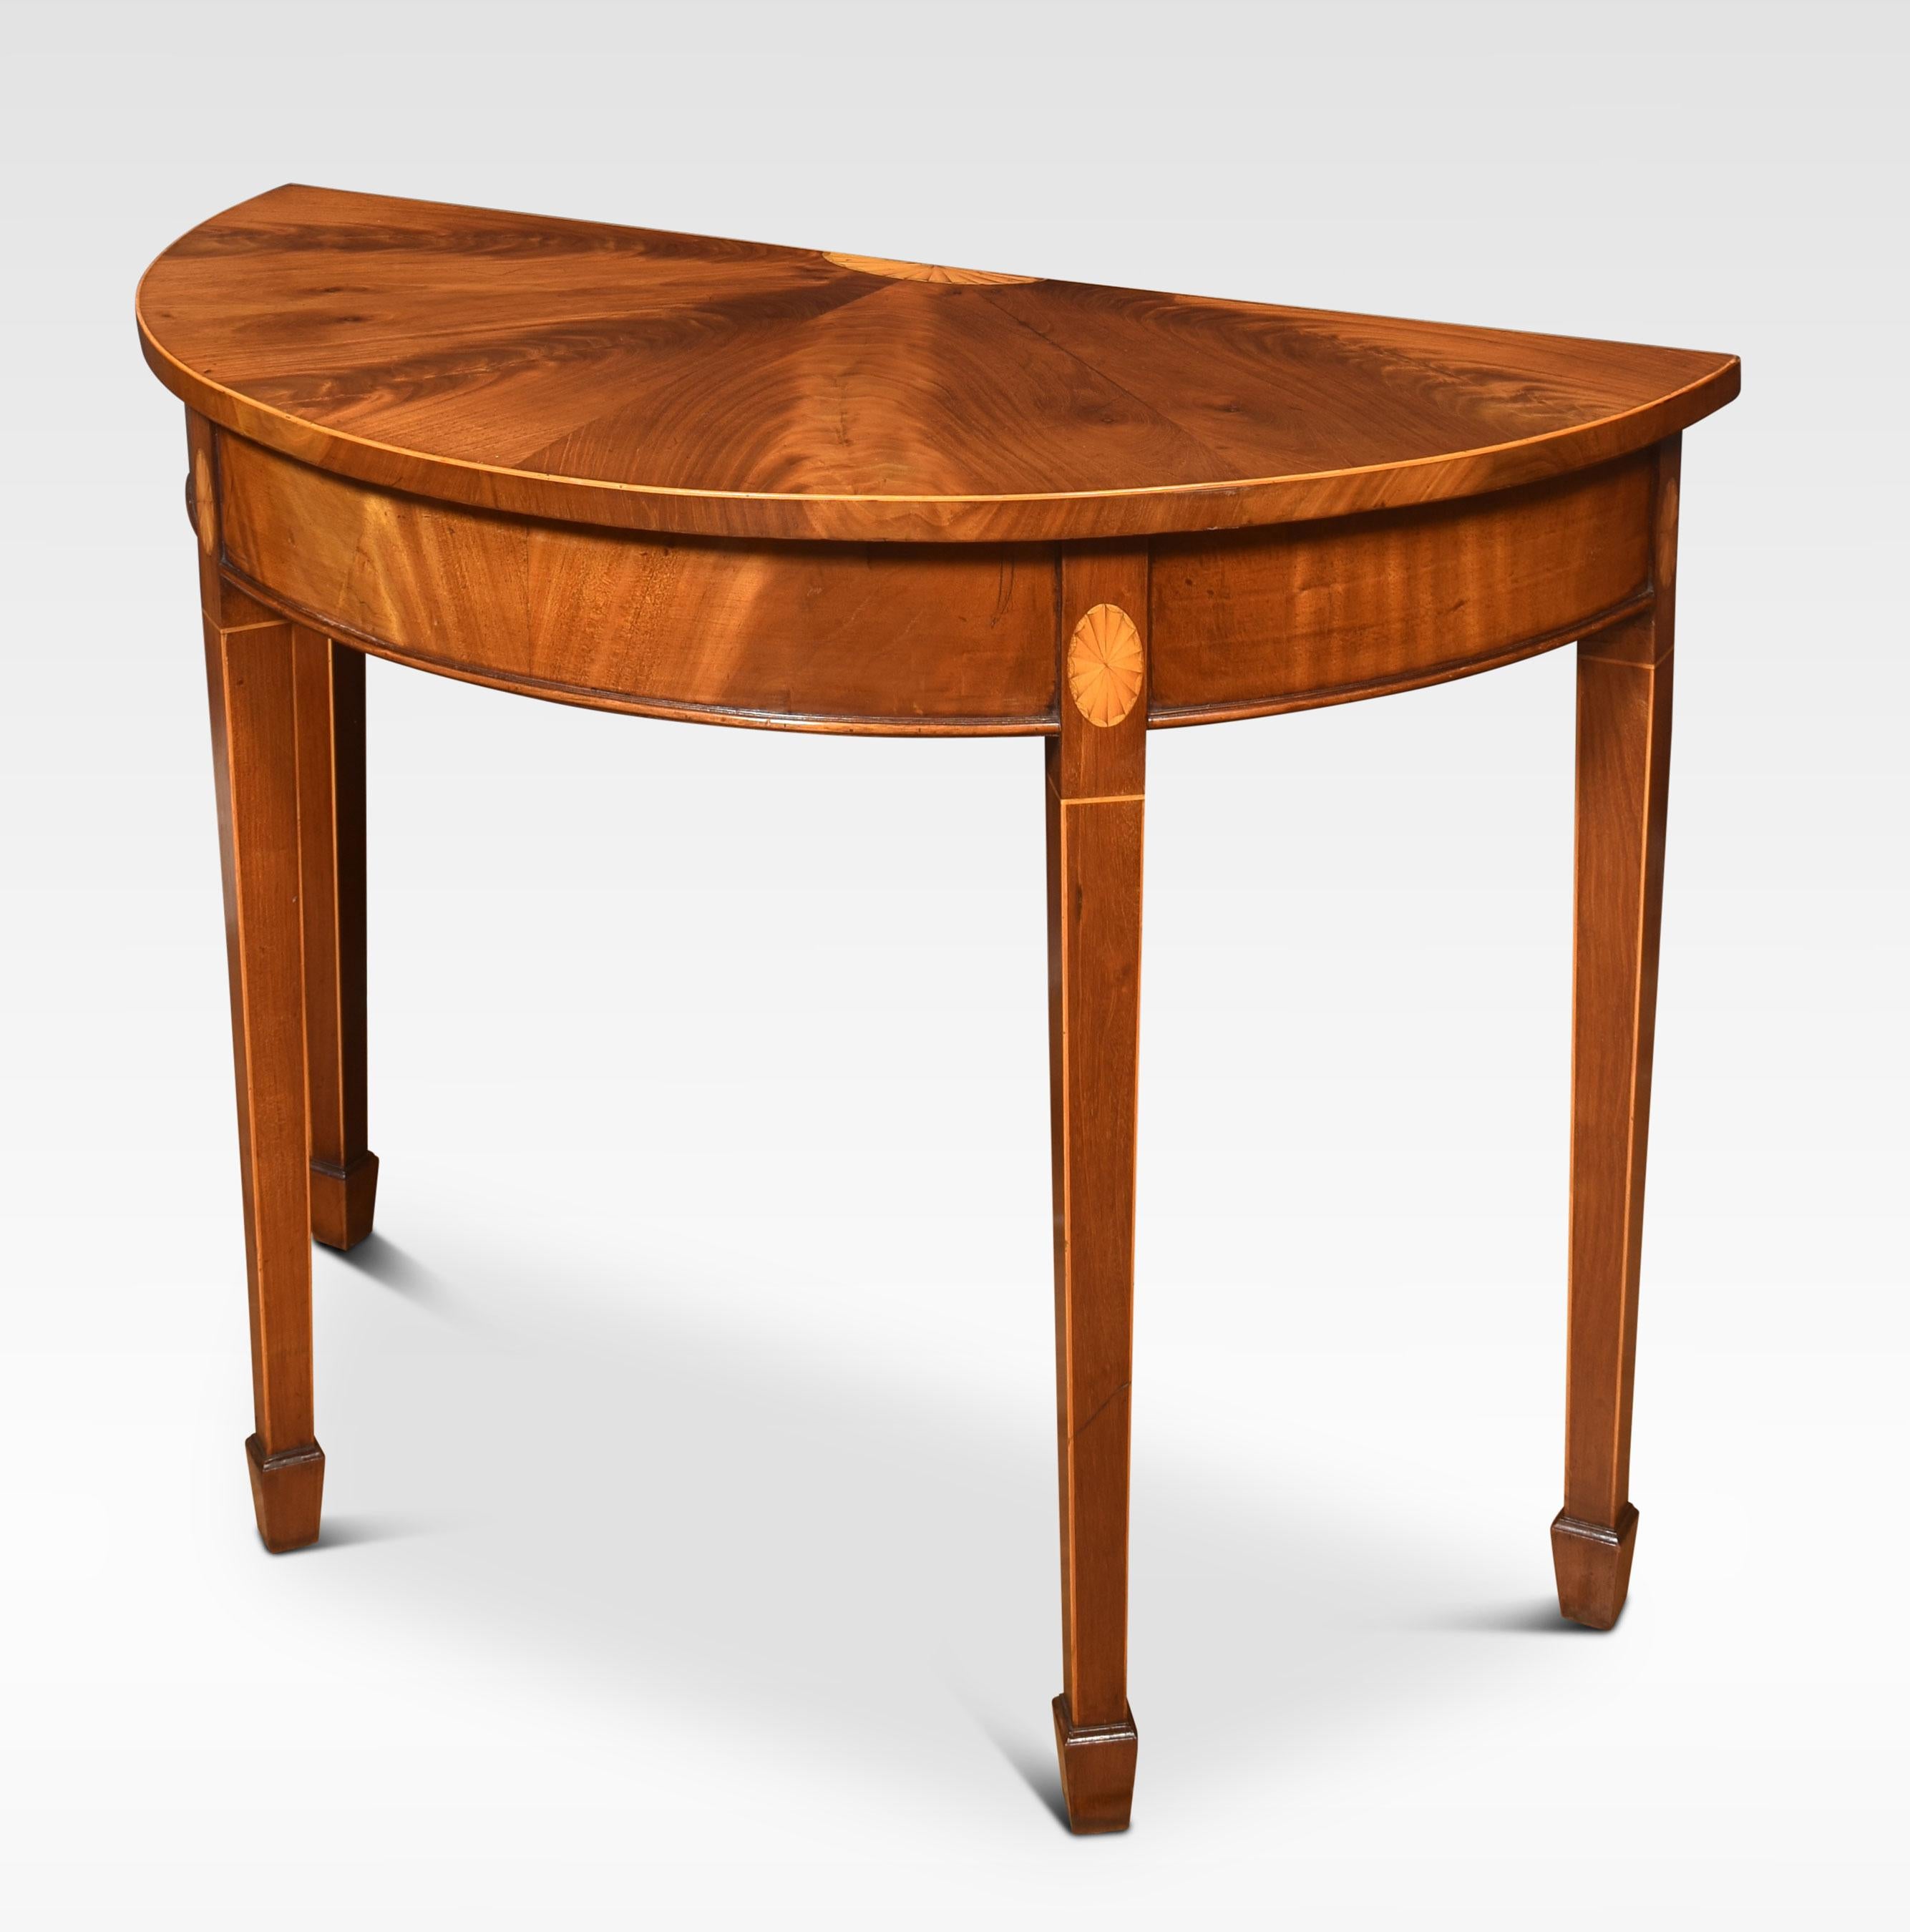 Pair of hall tables the well-figured half-round tops above inlaid frieze with satinwood stringing. All raised up on tapering legs, terminating in spade feet.
Dimensions
Height 30 Inches
Width 39.5 Inches
Depth 19 Inches